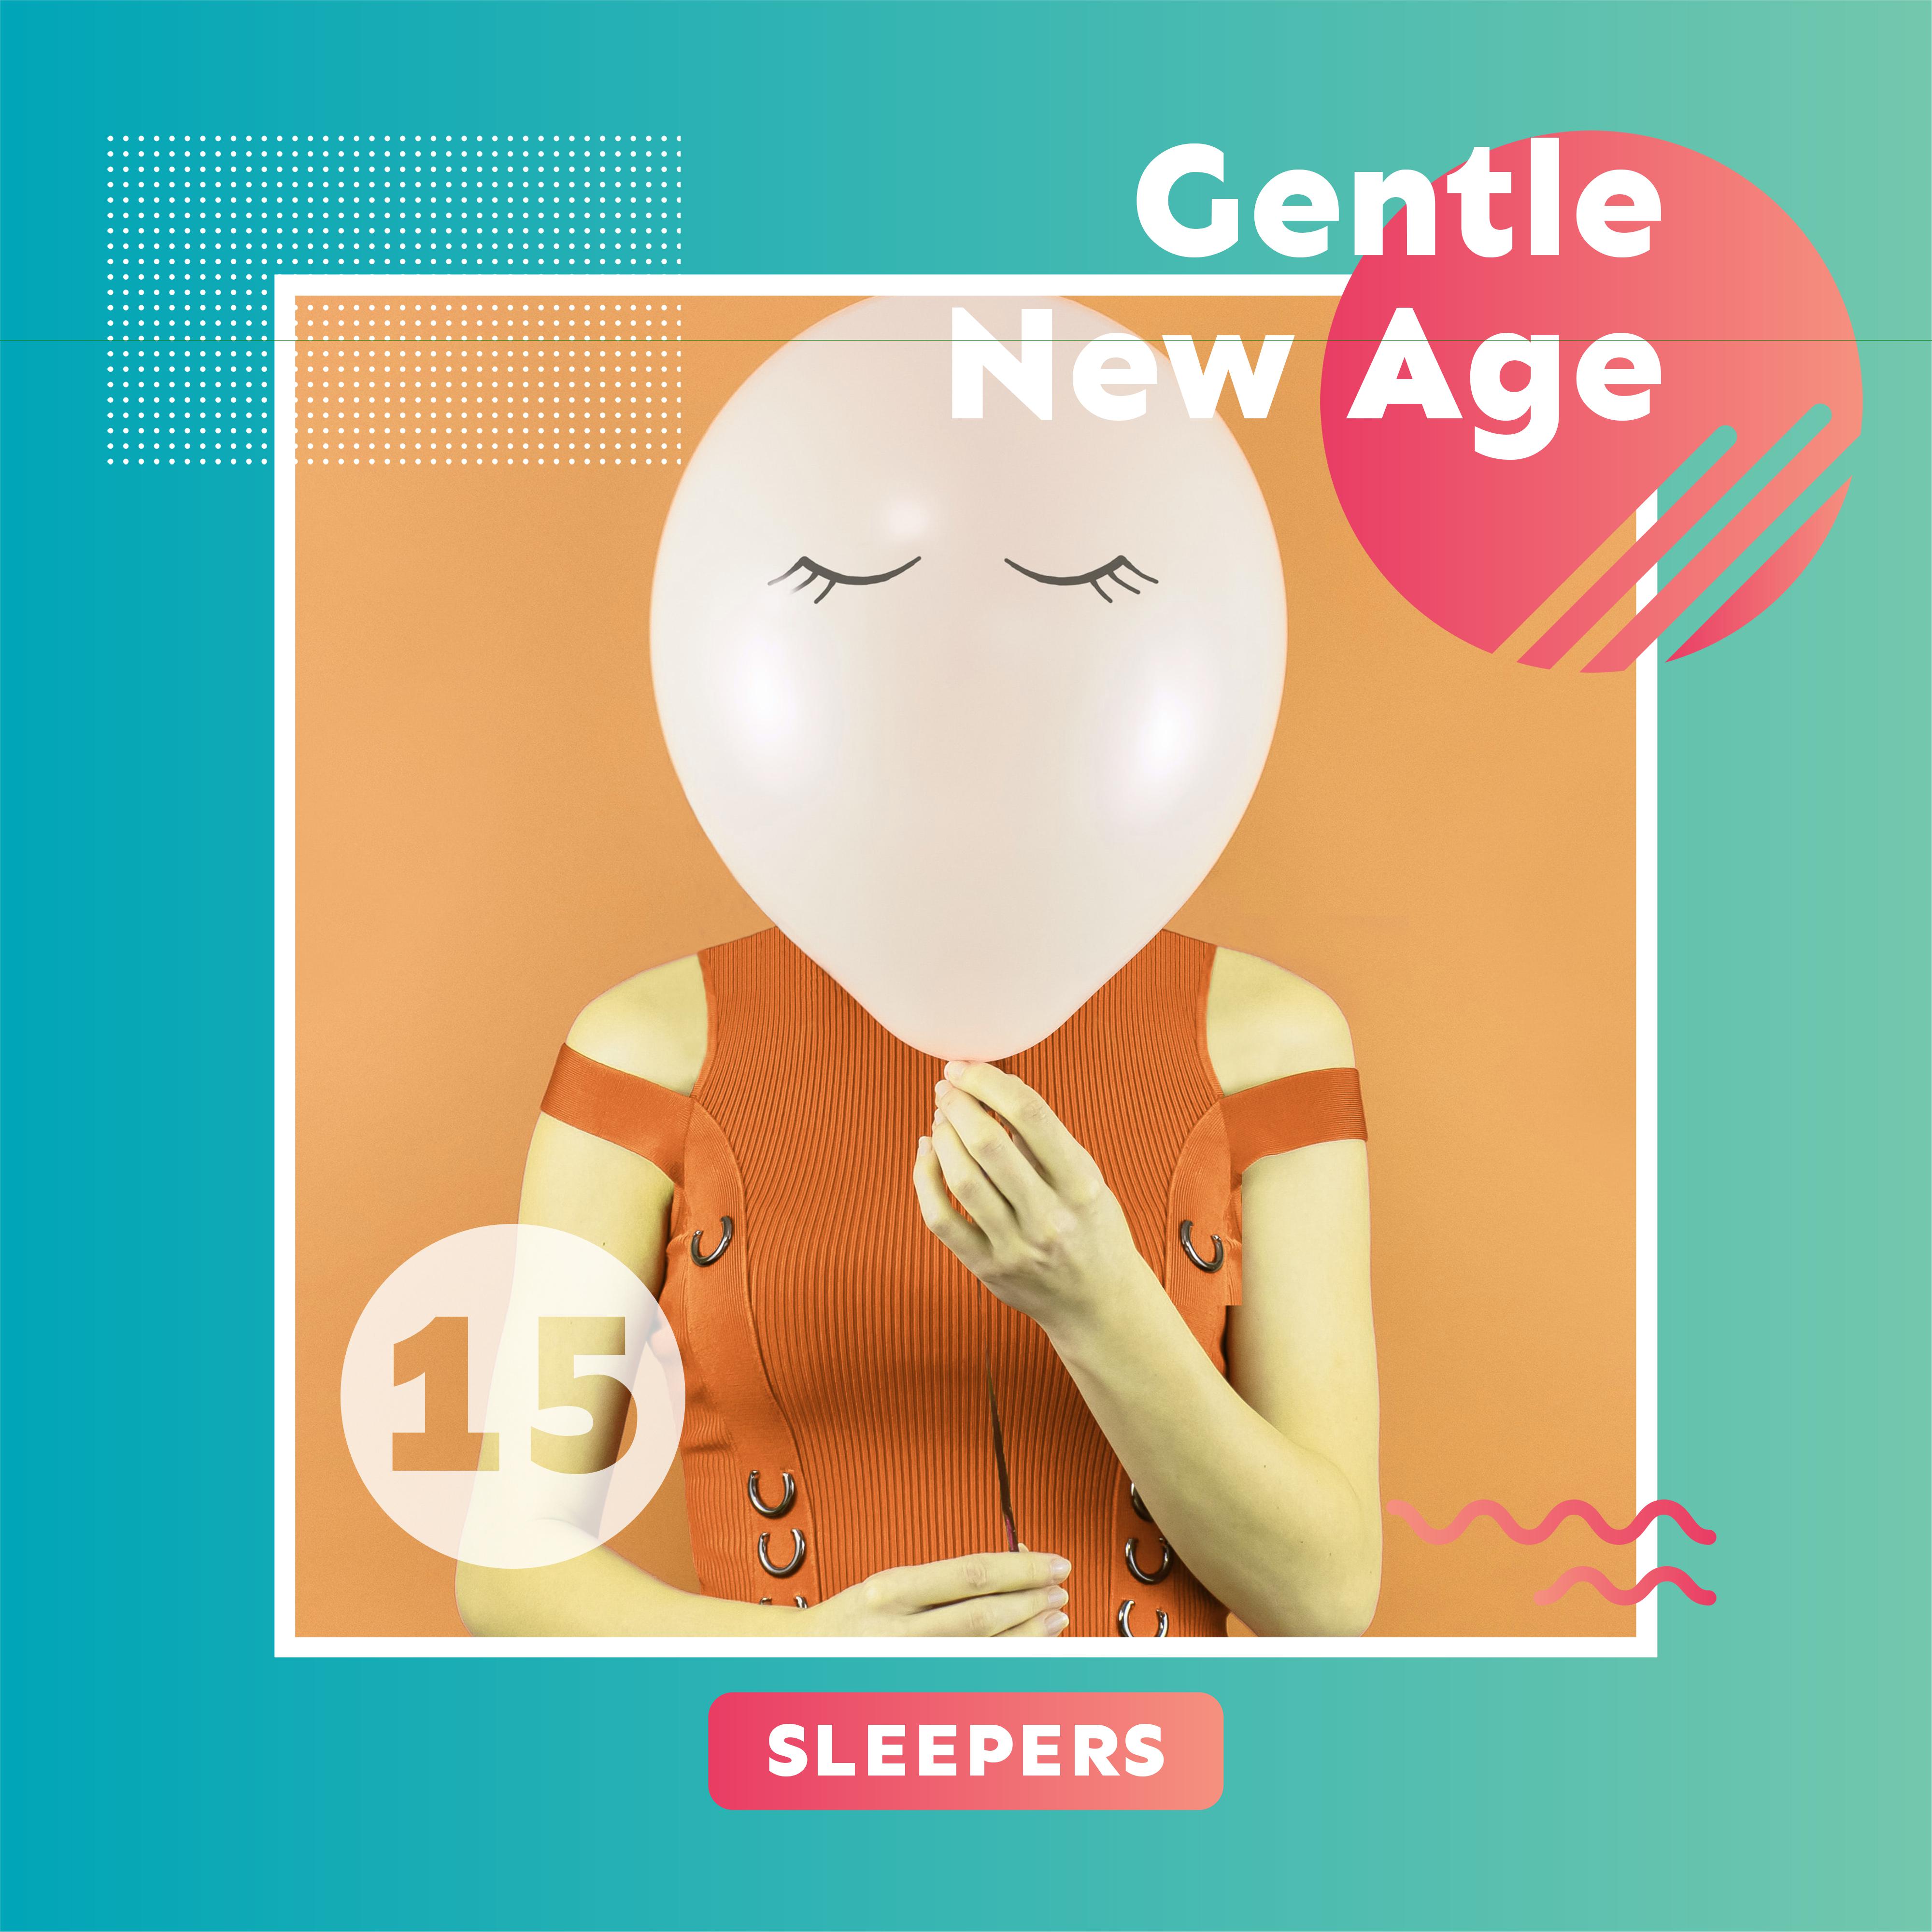 15 Gentle New Age Sleepers: 2019 Soft Instrumental Ambient Music for Good Night, Restful Sleep All Night Long, Cure Insomnia, Calm Your Nerves, Fight with Bad Thoughts, Melodies Played on Saxophone